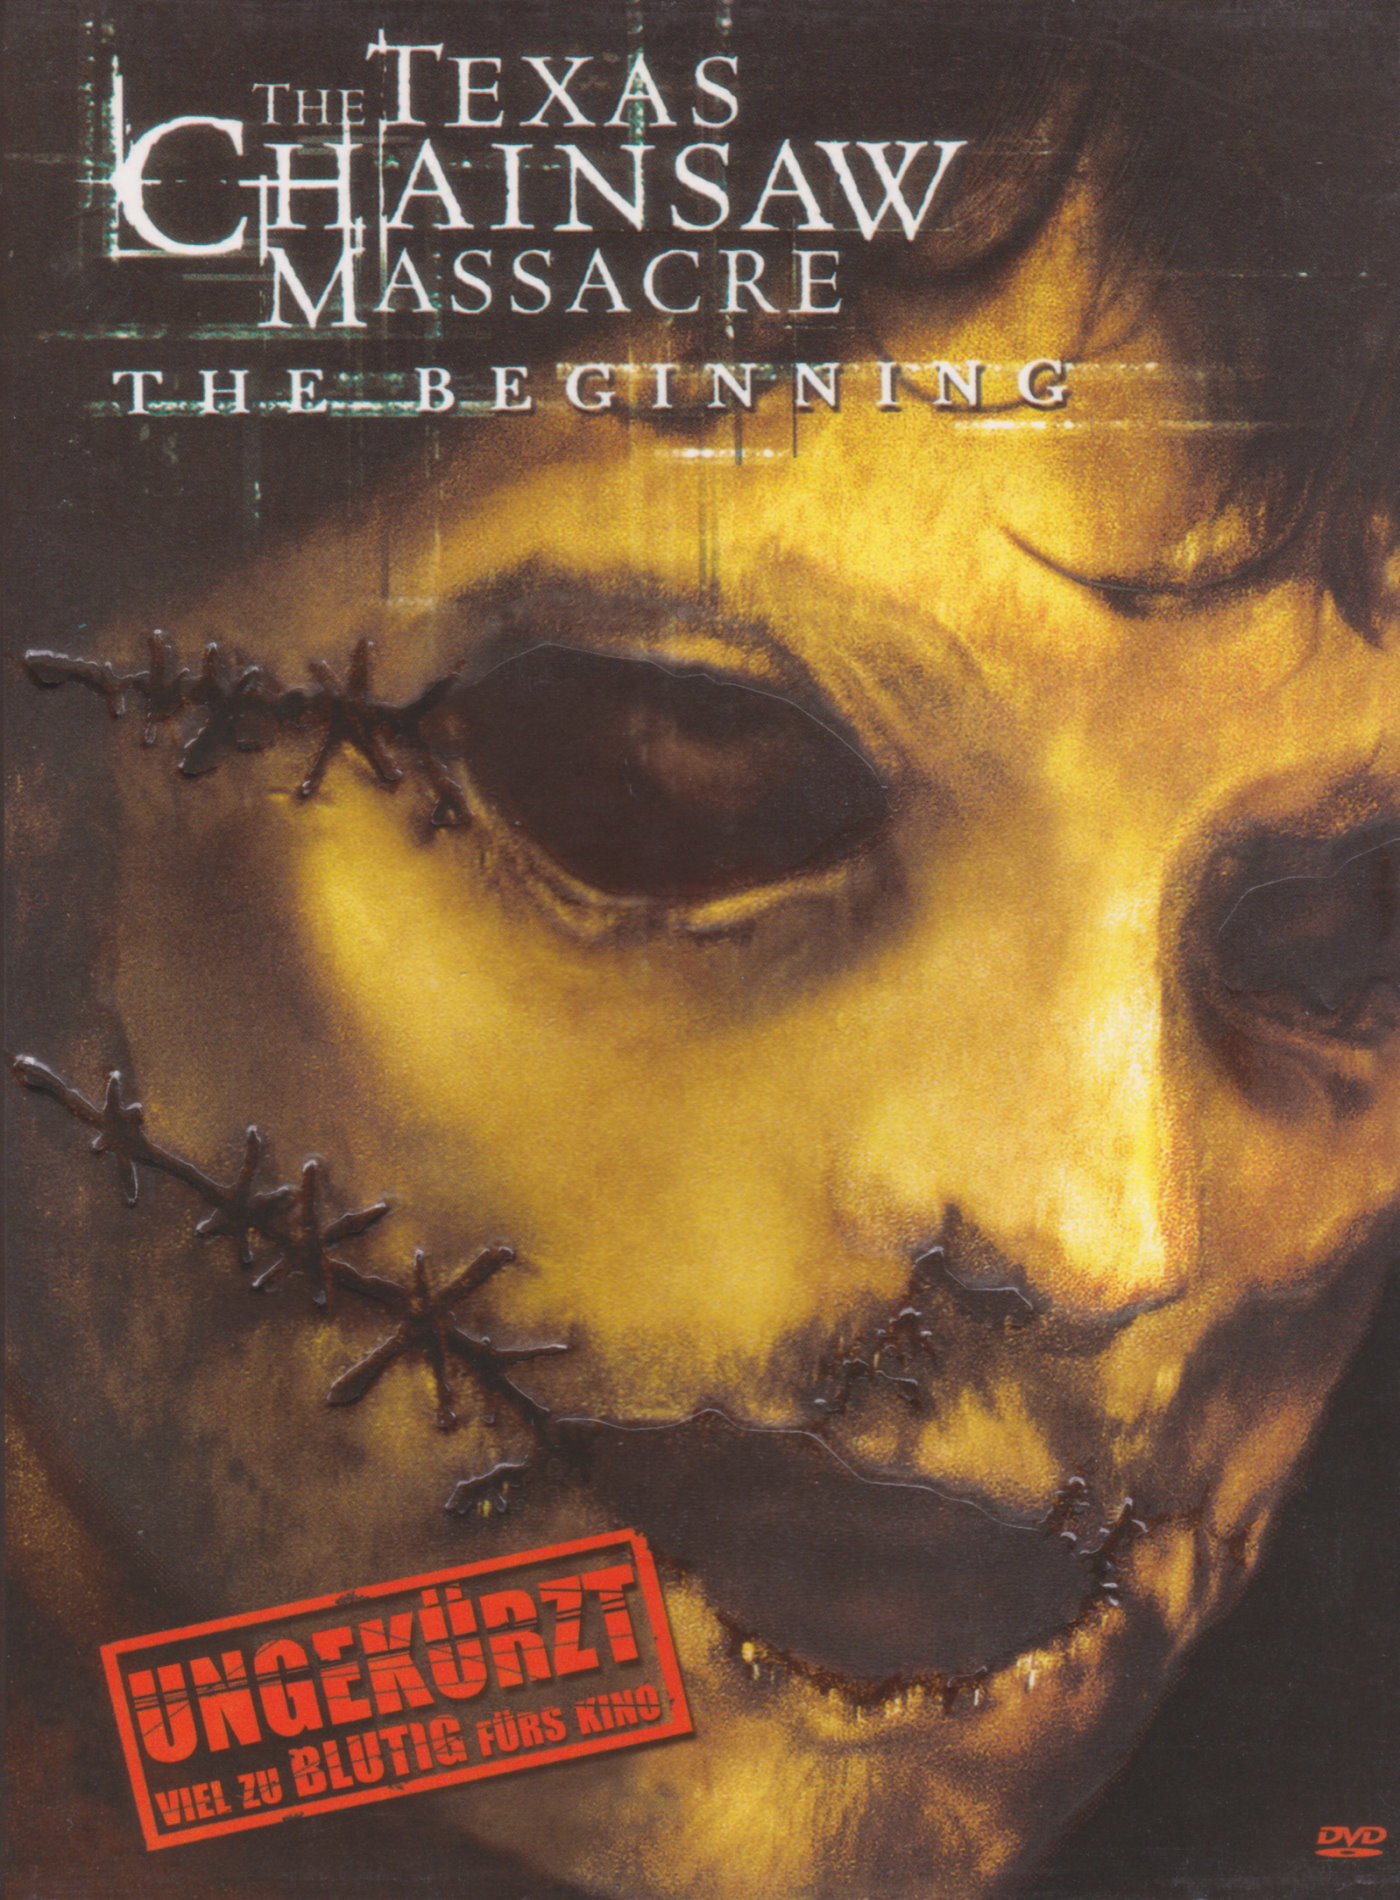 Cover - The Texas Chainsaw Massacre - The Beginning.jpg